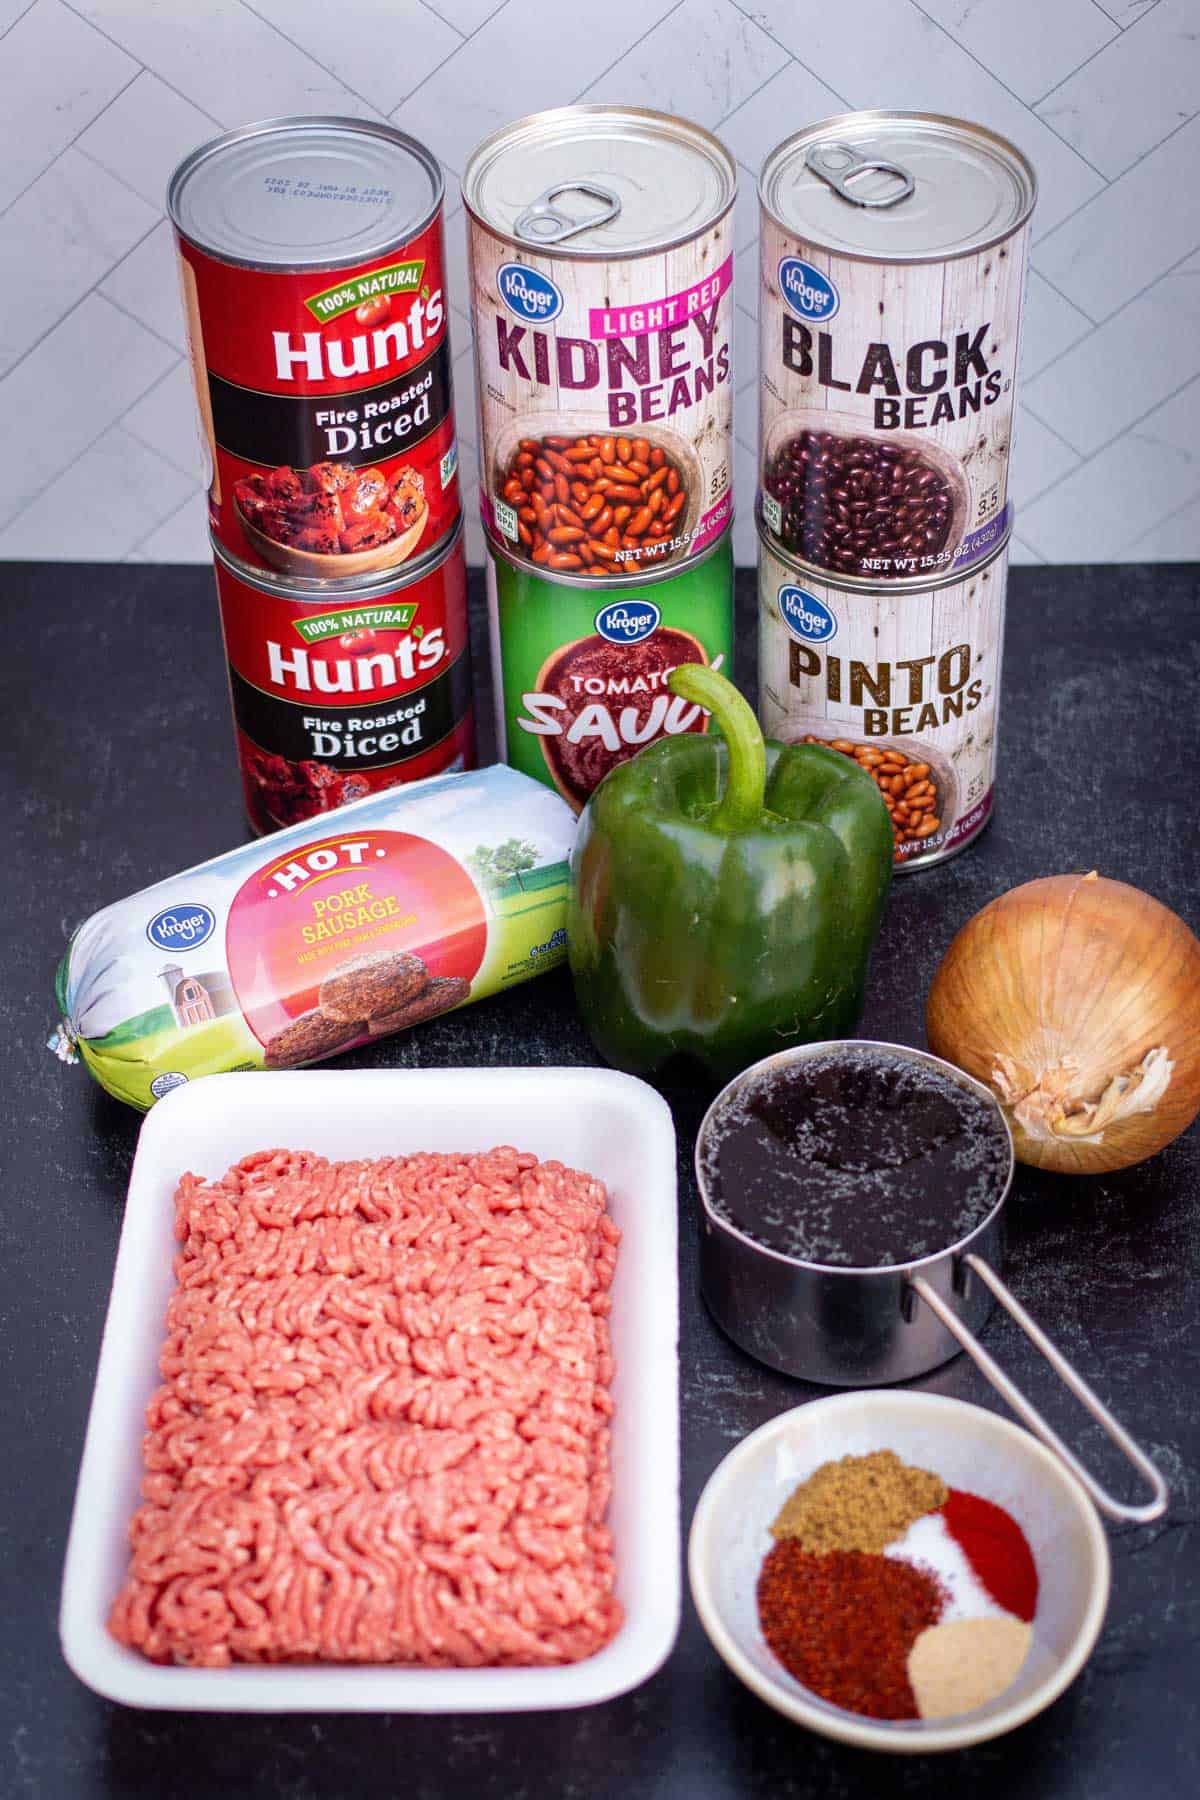 Classic beef and sausage chili ingredients: ground beef, hot pork sausage, beef stock, onion, green bell pepper, black beans, pinto beans, light red kidney beans, tomato sauce, fire roasted diced tomatoes, and seasoning.